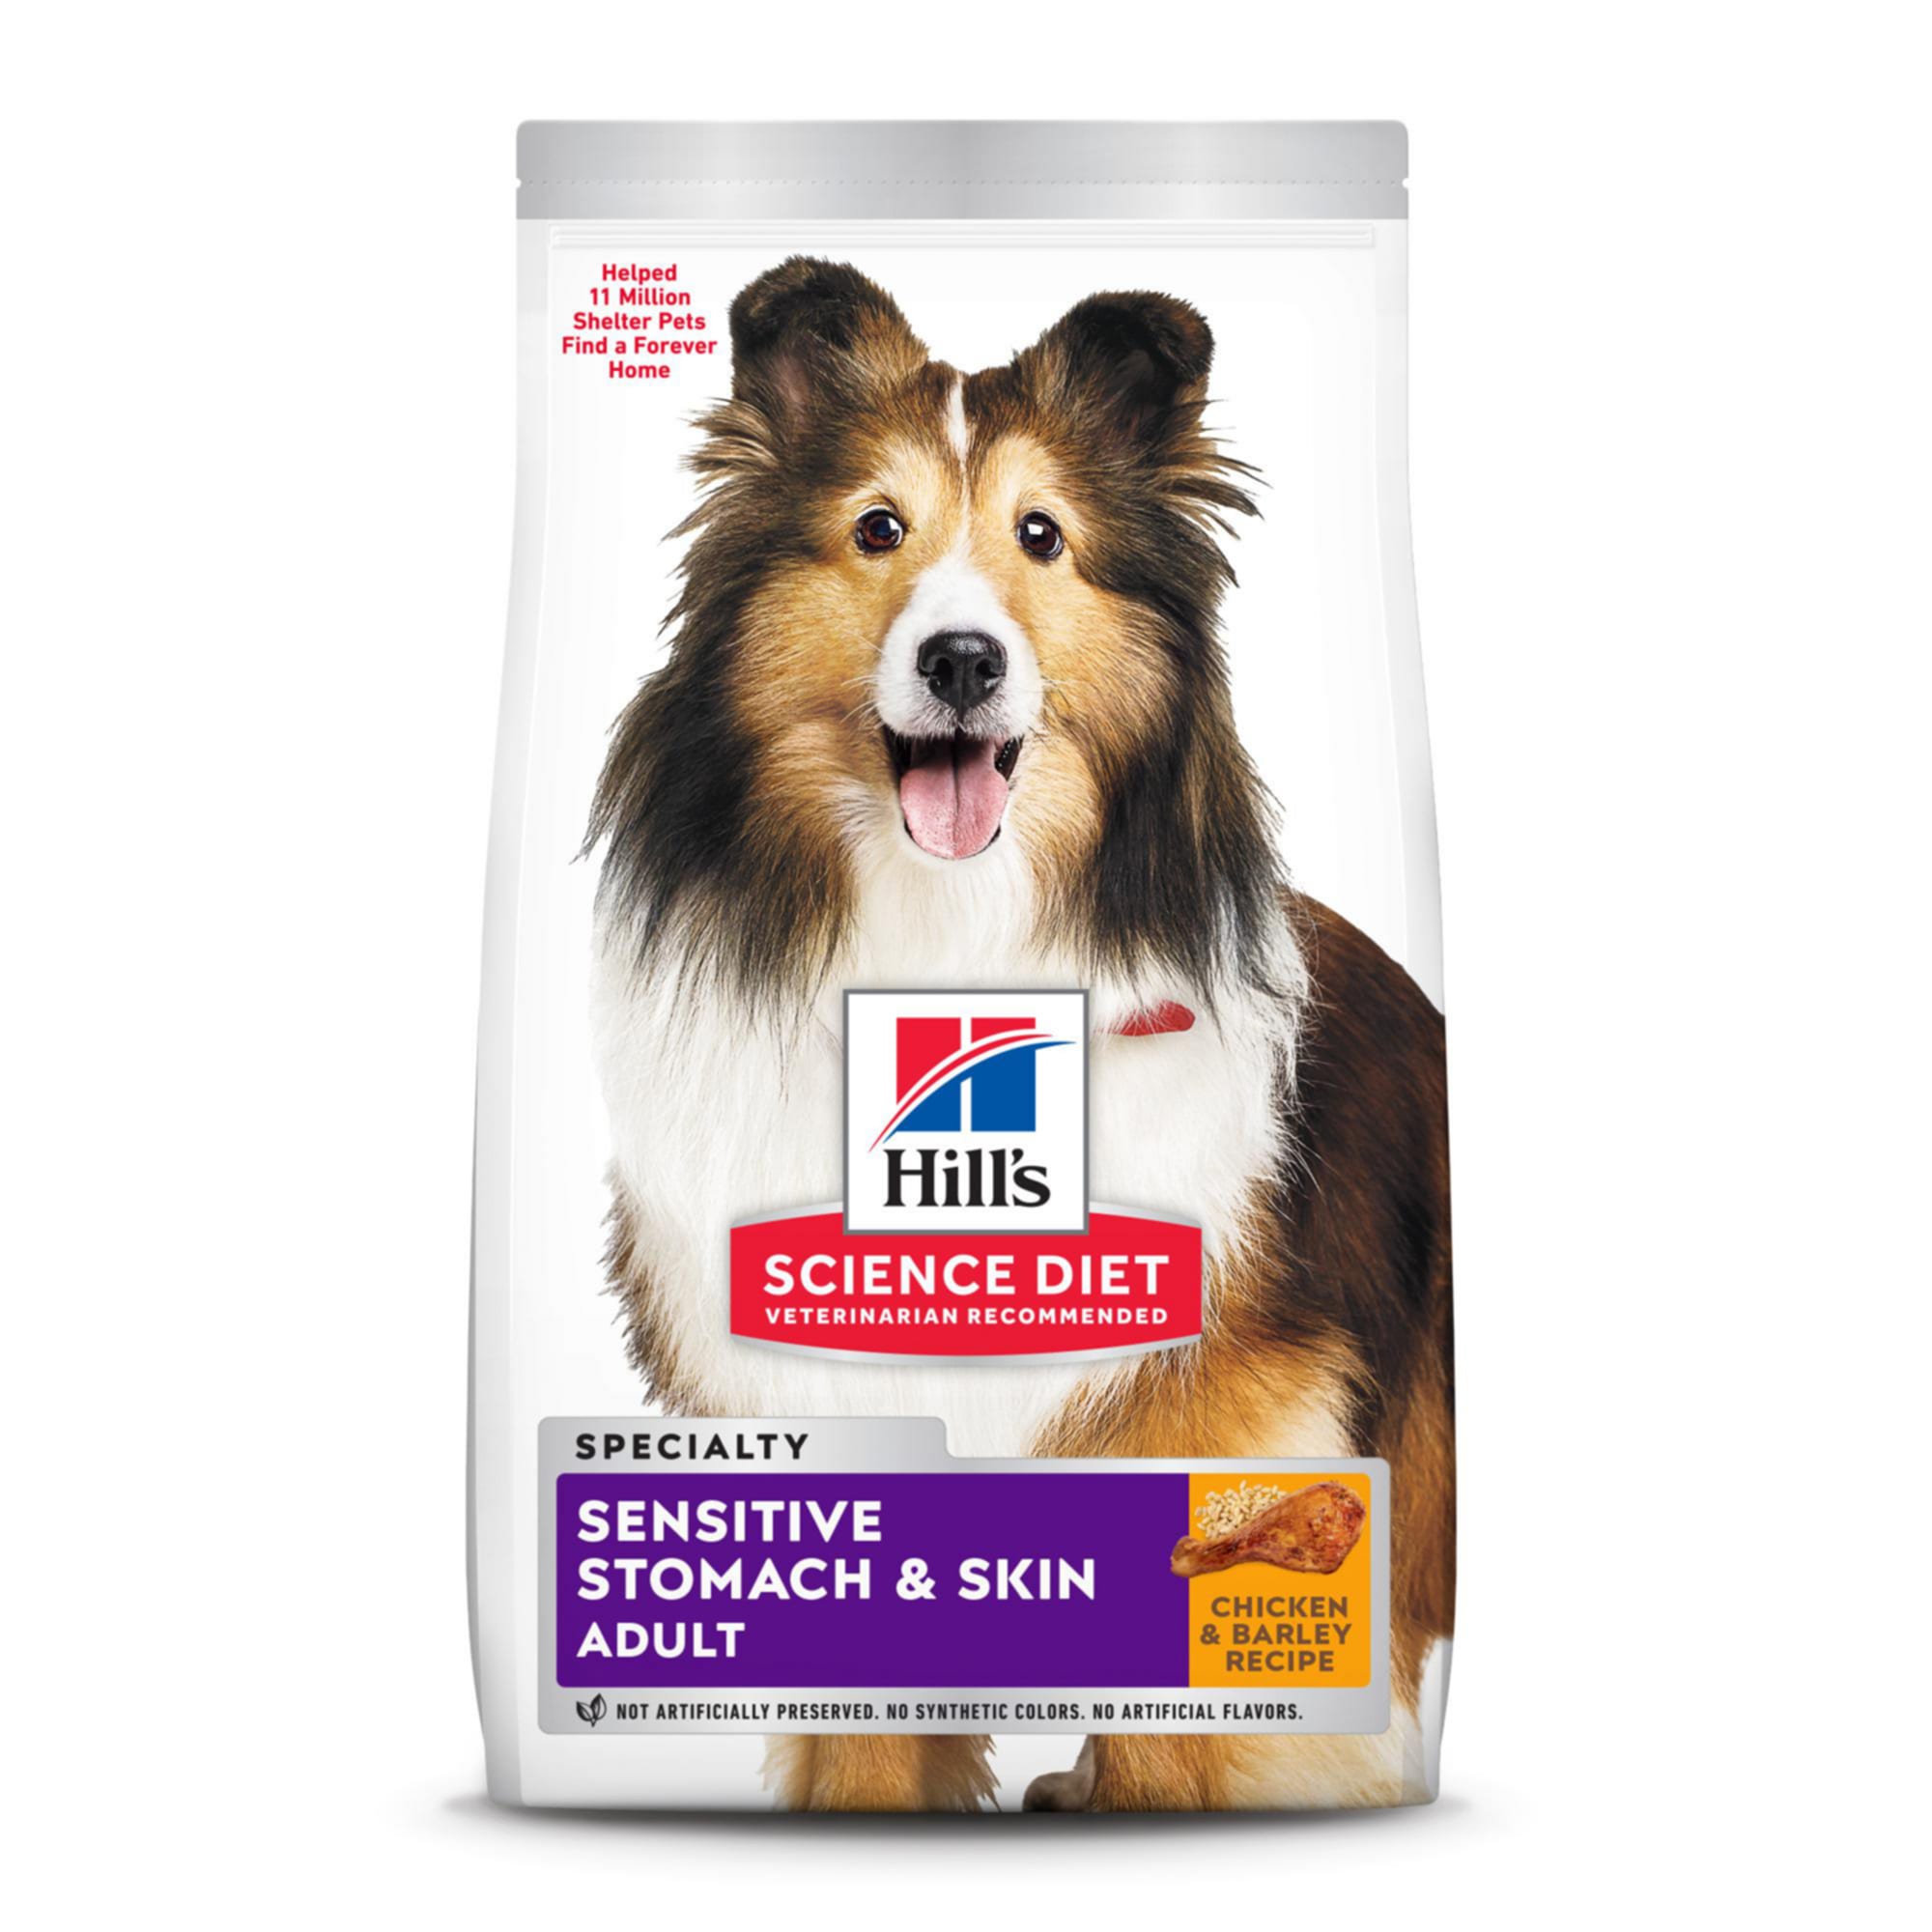 Hill's Science Diet Adult Sensitive Stomach & Skin Chicken Recipe Dry Dog Food, 30 lbs. Petco